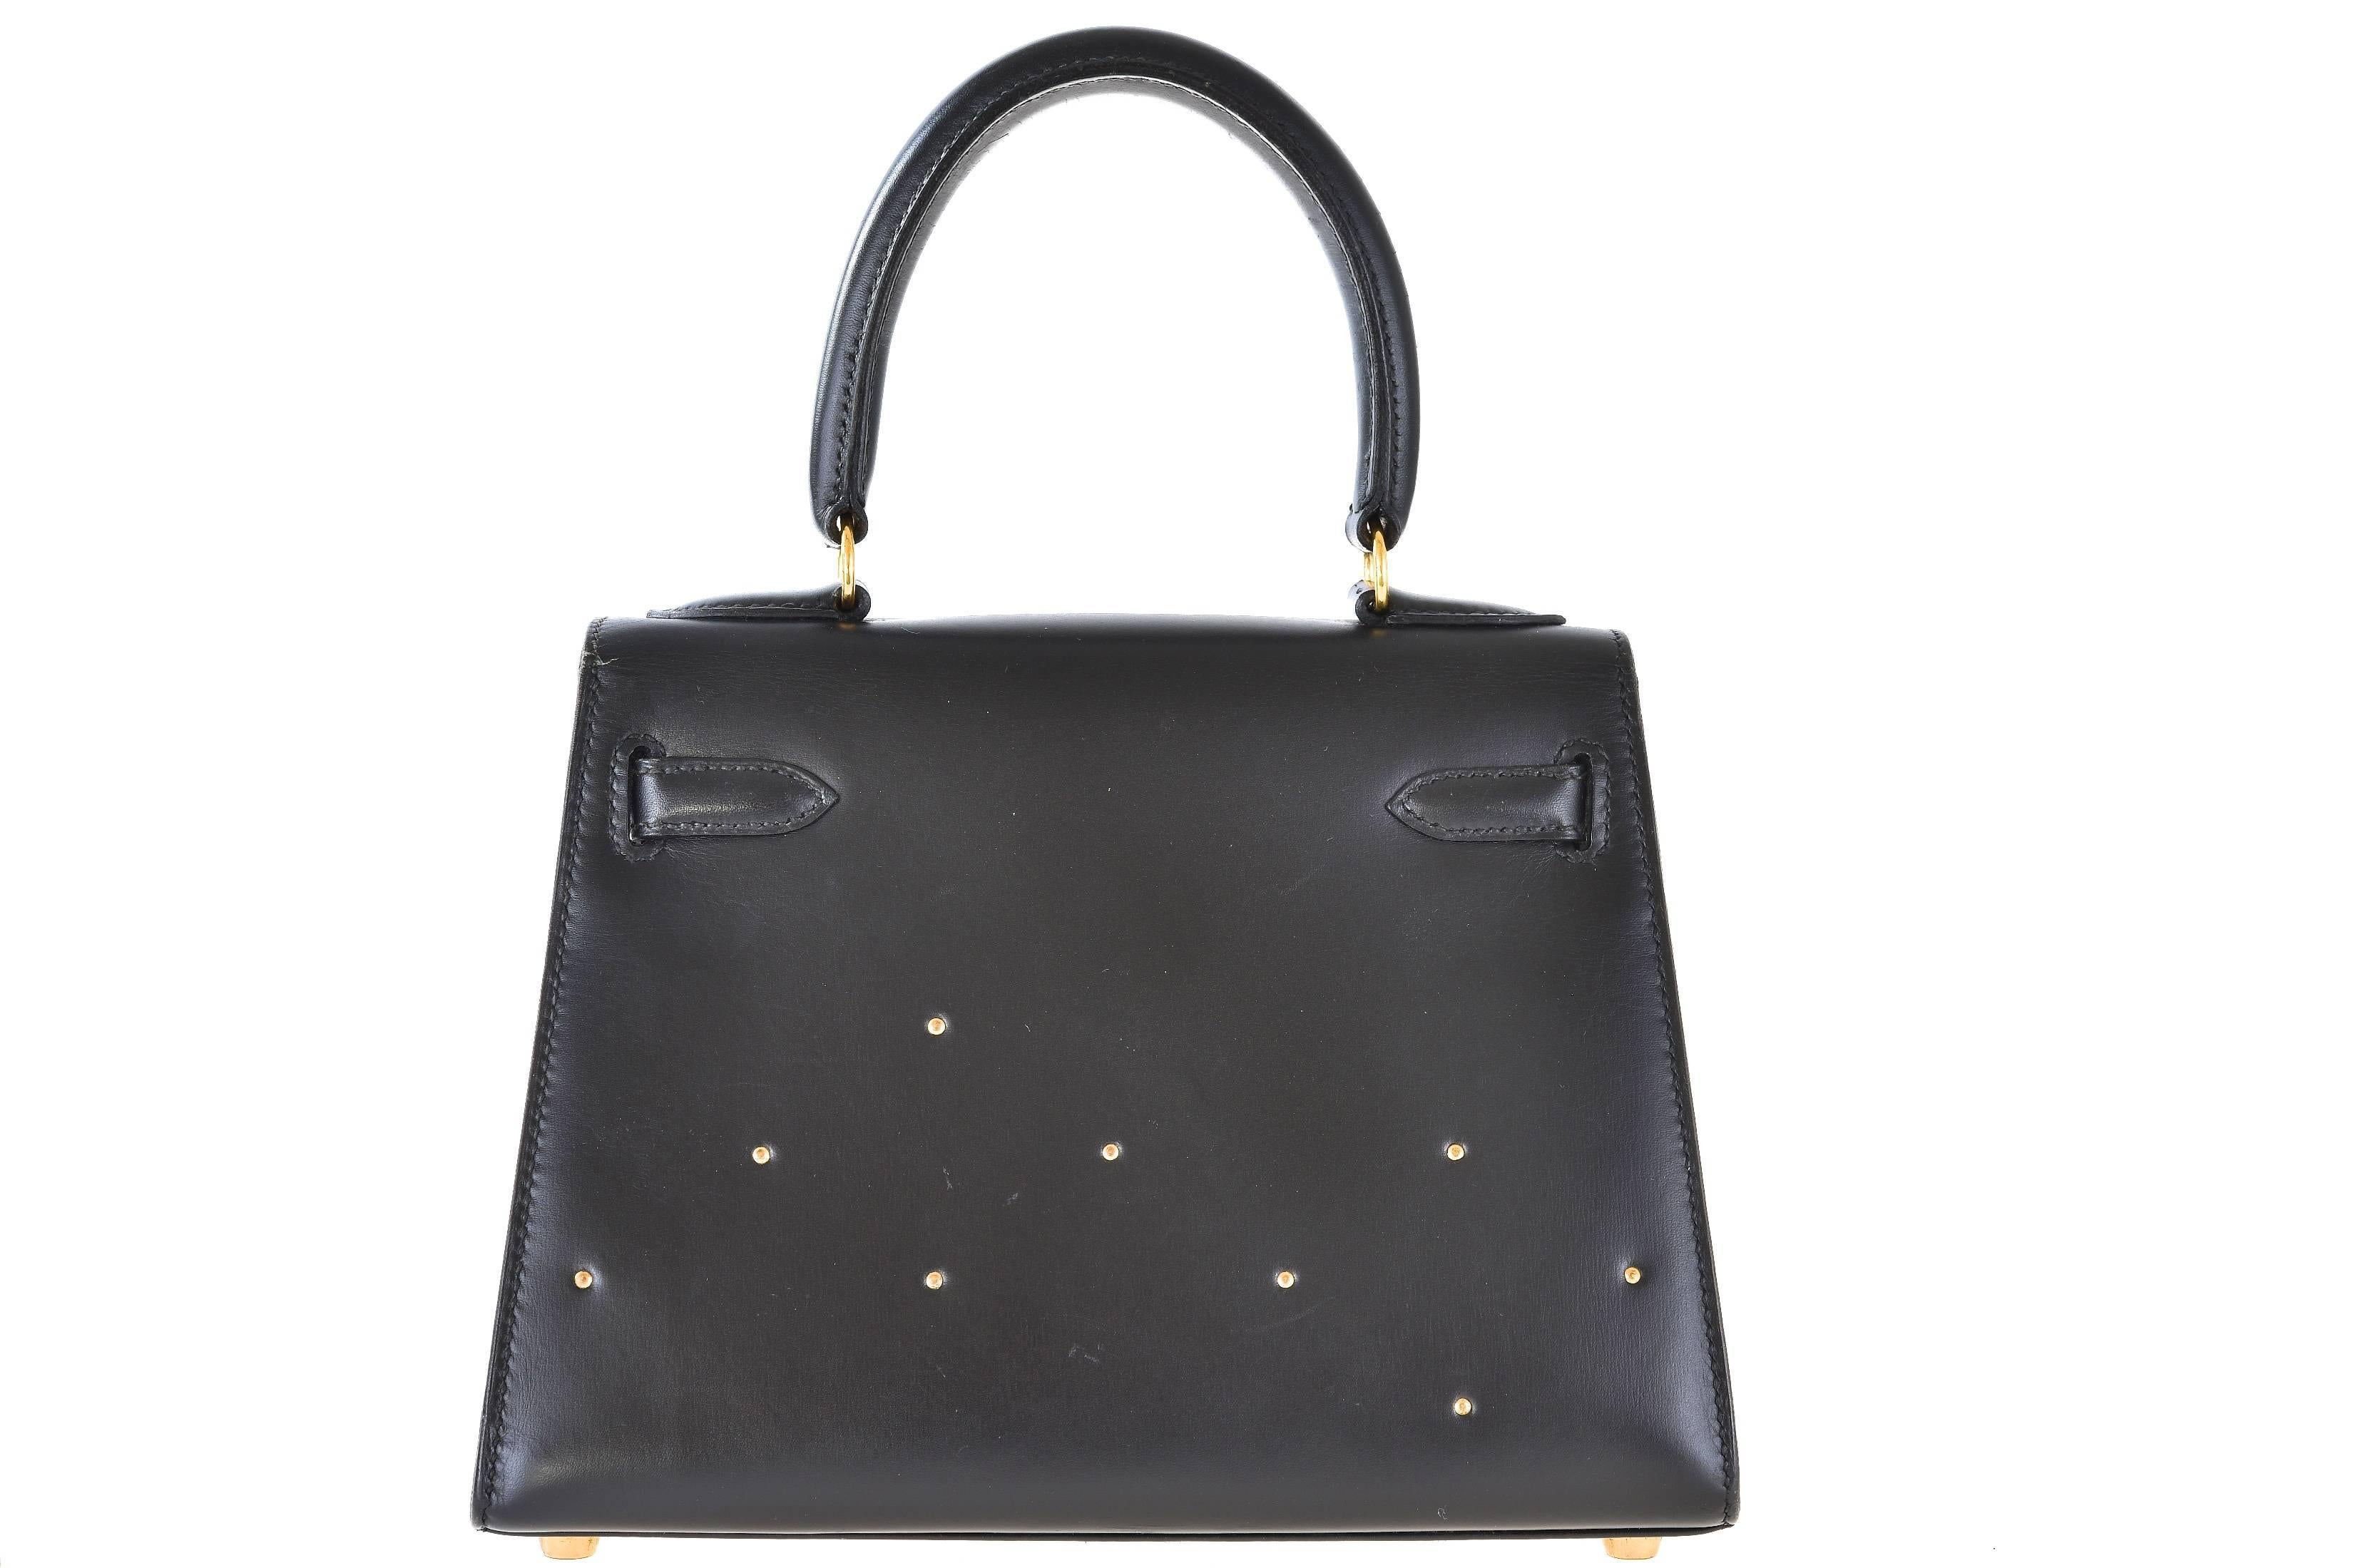 Excellent Condition 

The Hermes Kelly you have never seen! Kelly in black box with gold studs. The strap is custom 50” long, perfect for cross body.

This 20cm Cross body Kelly bag by Hermès in black box & gold Rock & Roll studs, gold